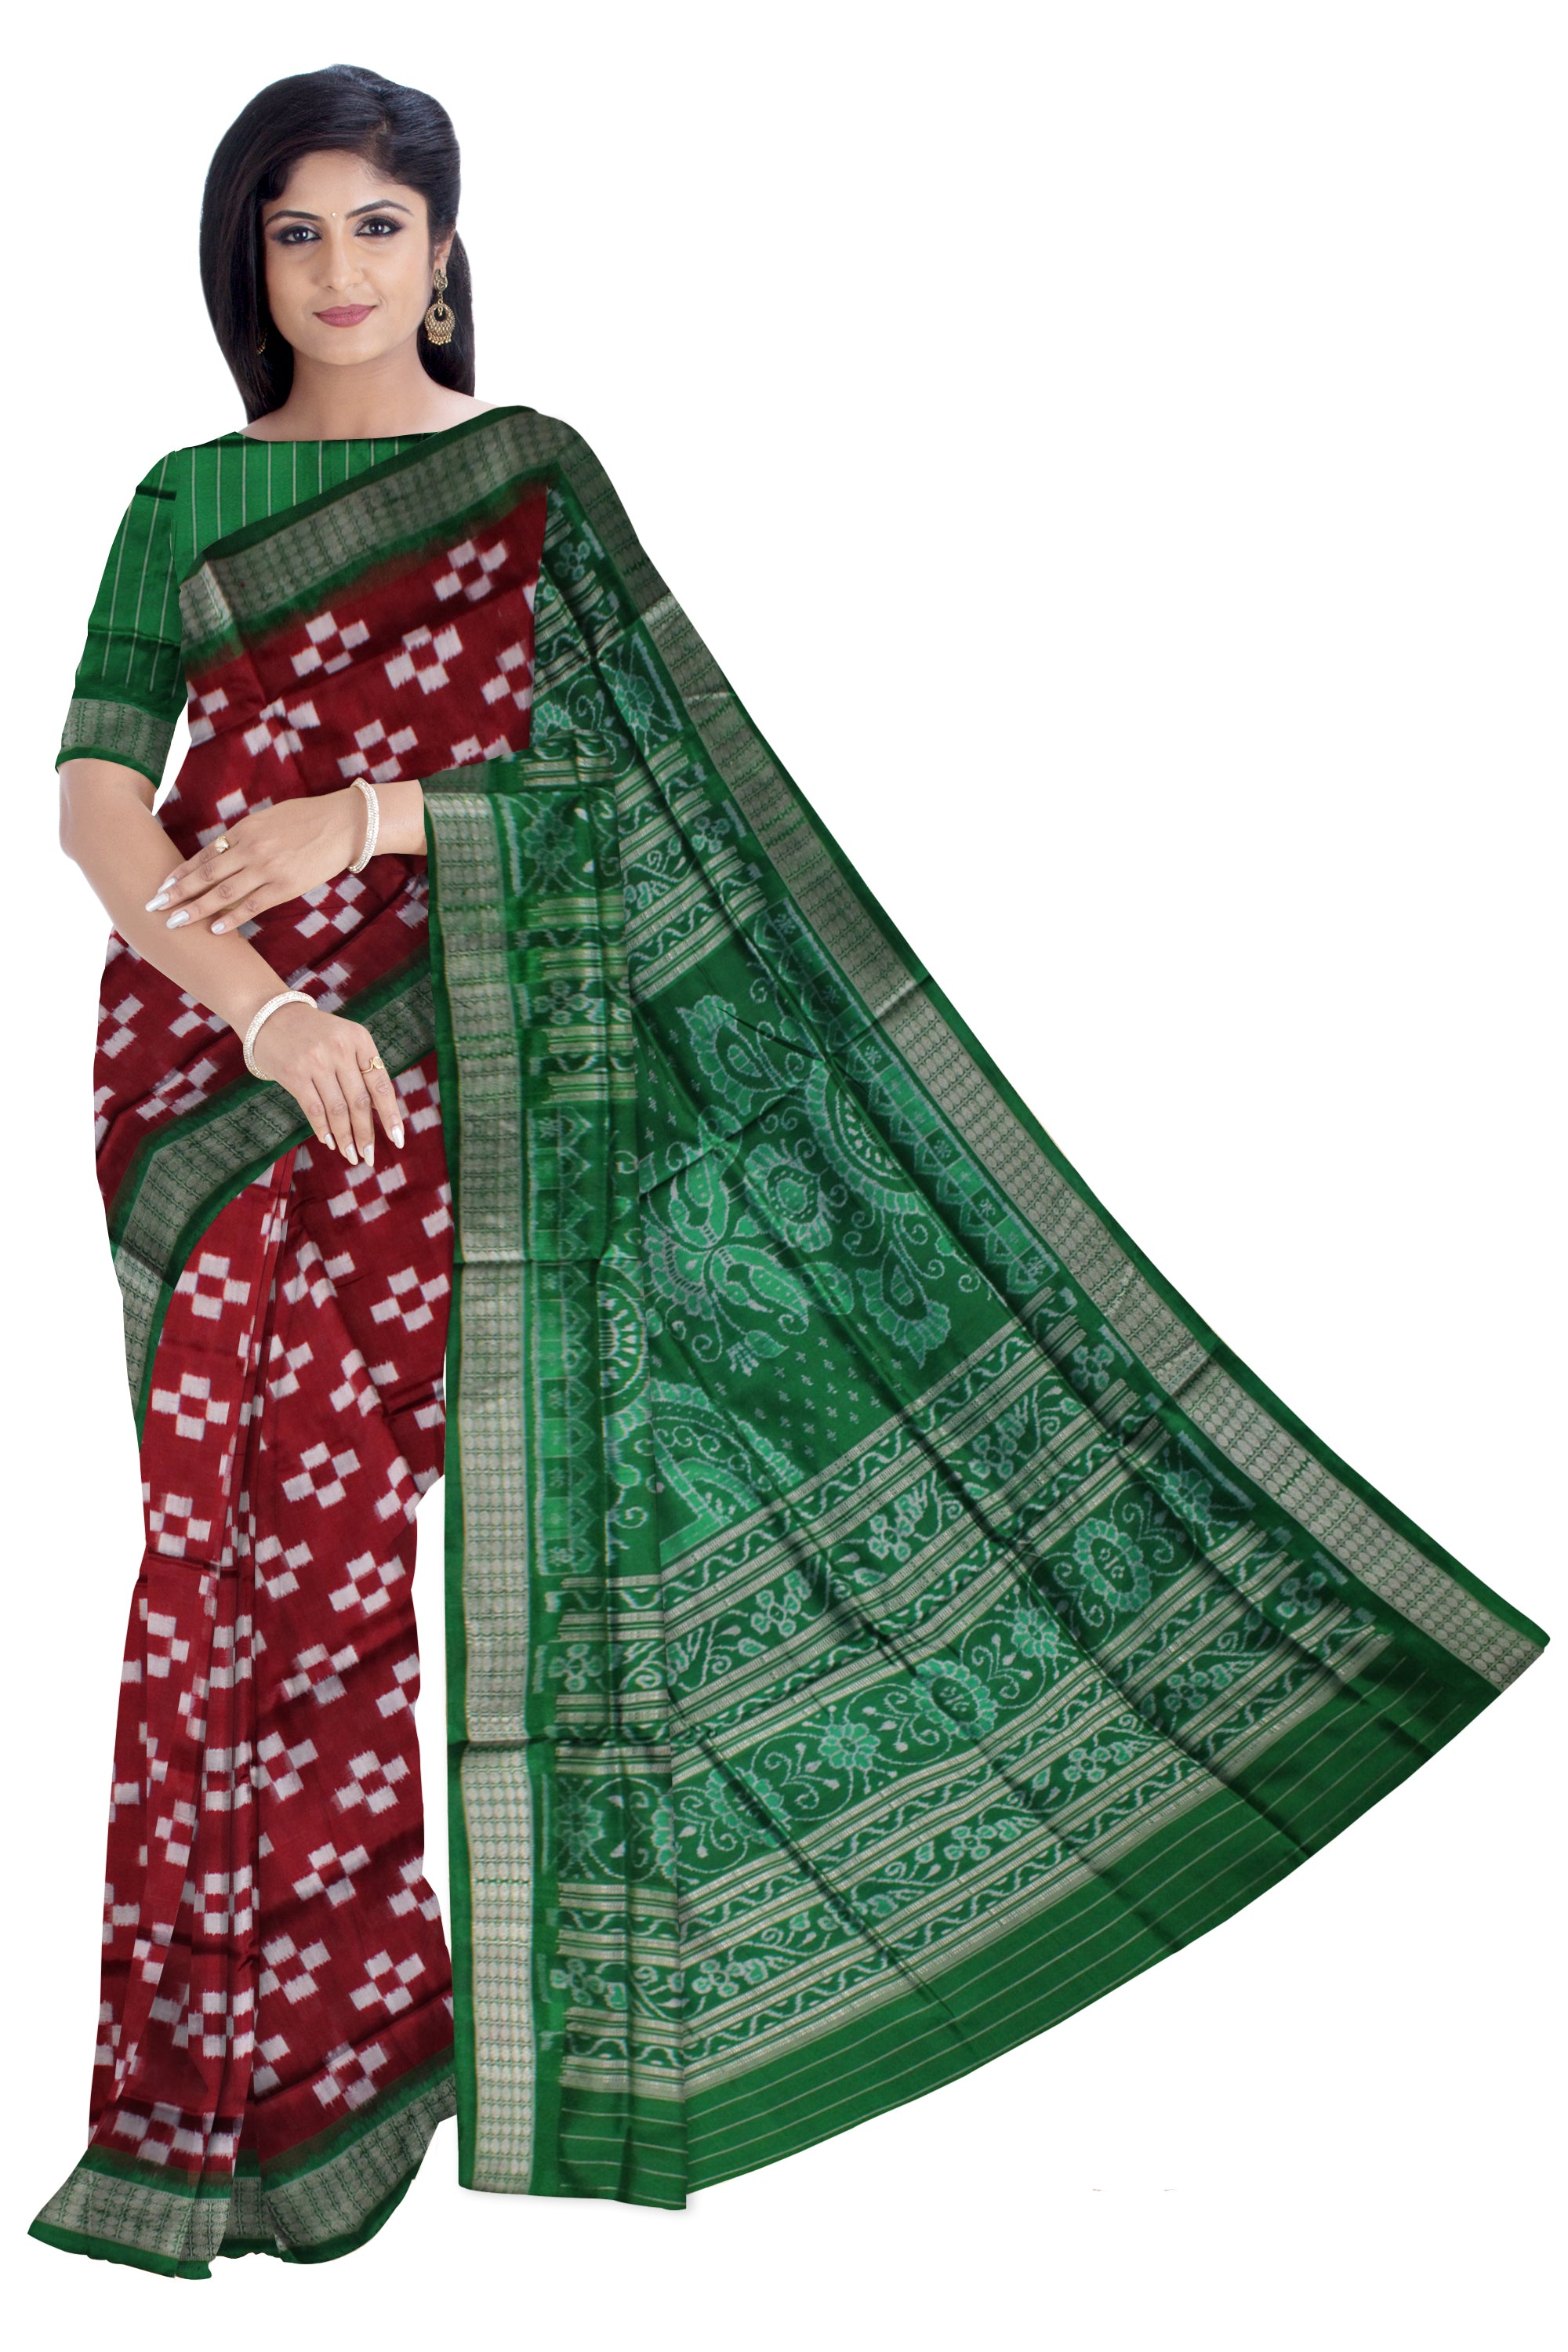 COFFEE WITH GREEN COLOR FULL BODY PASAPALI PATTERN PURE SILK SAREE,COMES WITH MATCHING BLOUSE PIECE. - Koshali Arts & Crafts Enterprise